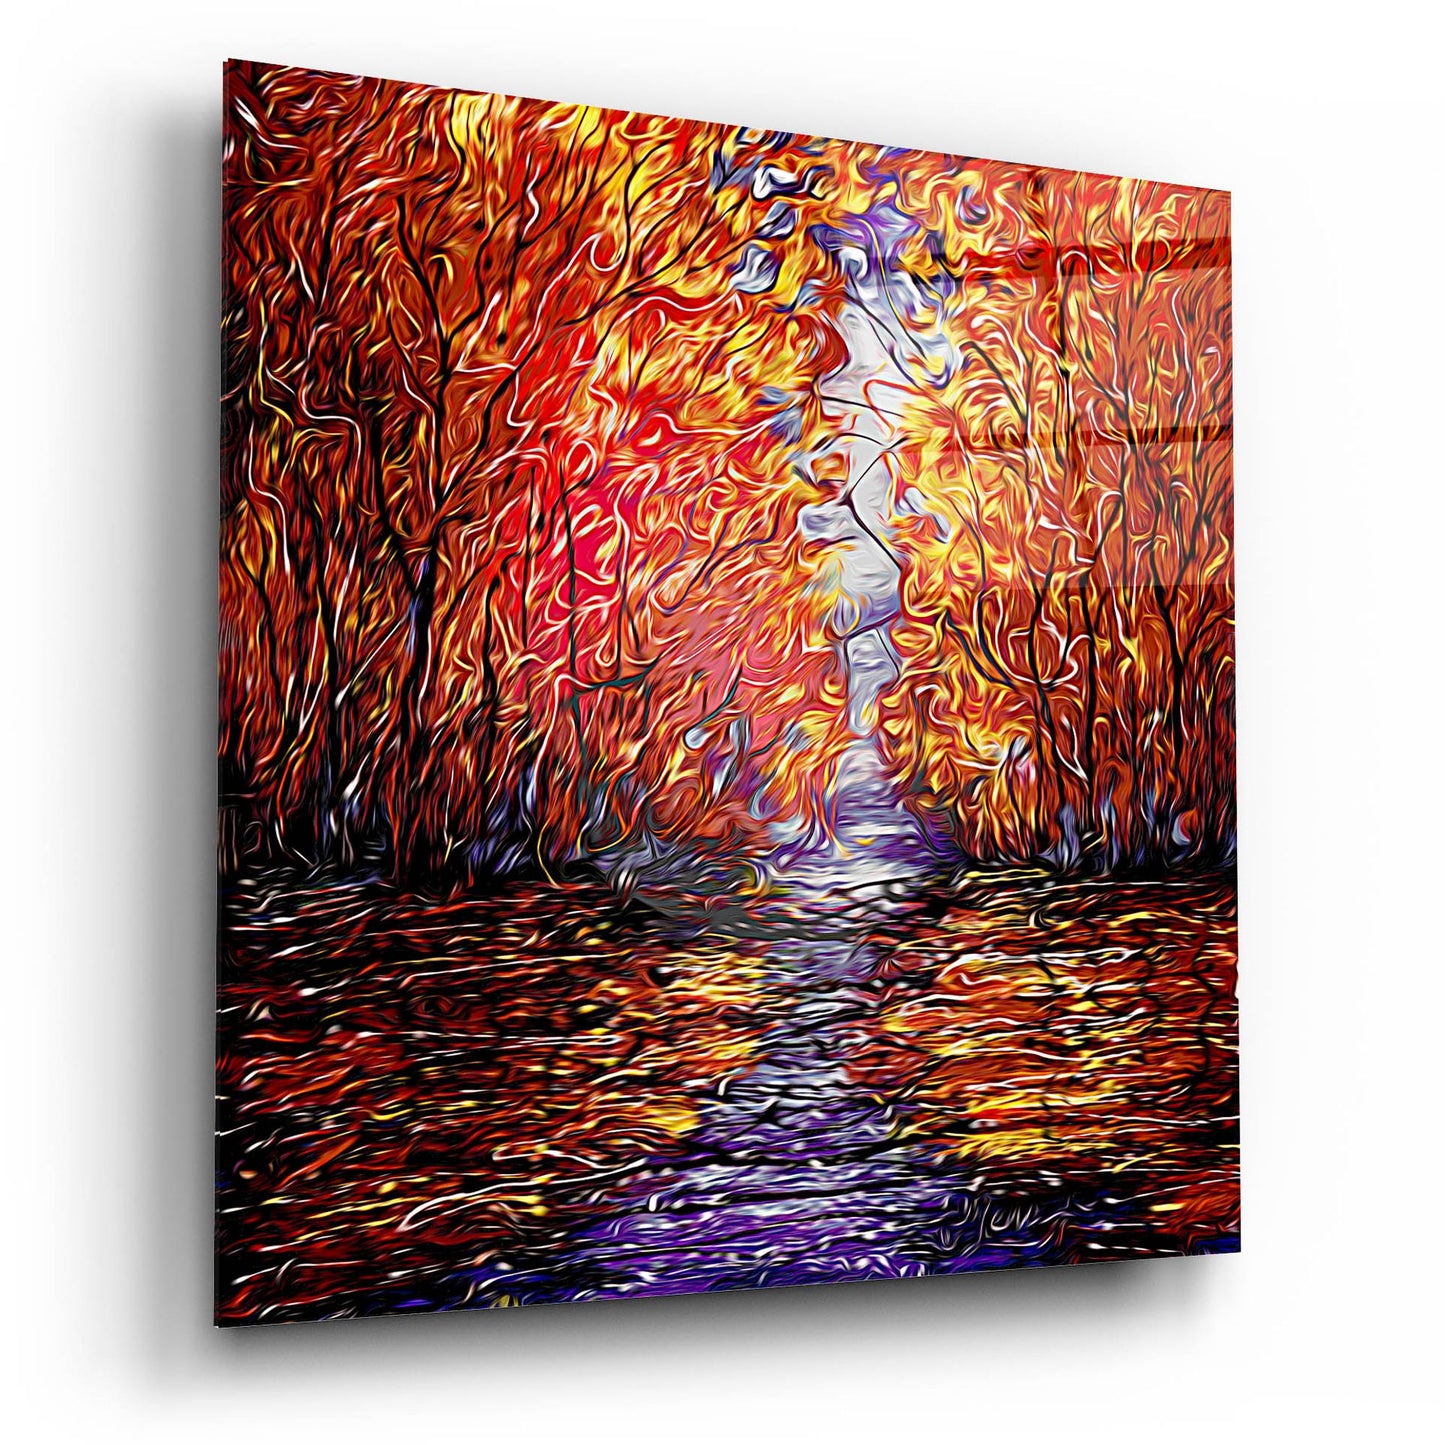 Epic Art 'Red Trees Reflection Abstract' by Lena Owens, Acrylic Glass Wall Art,12x12